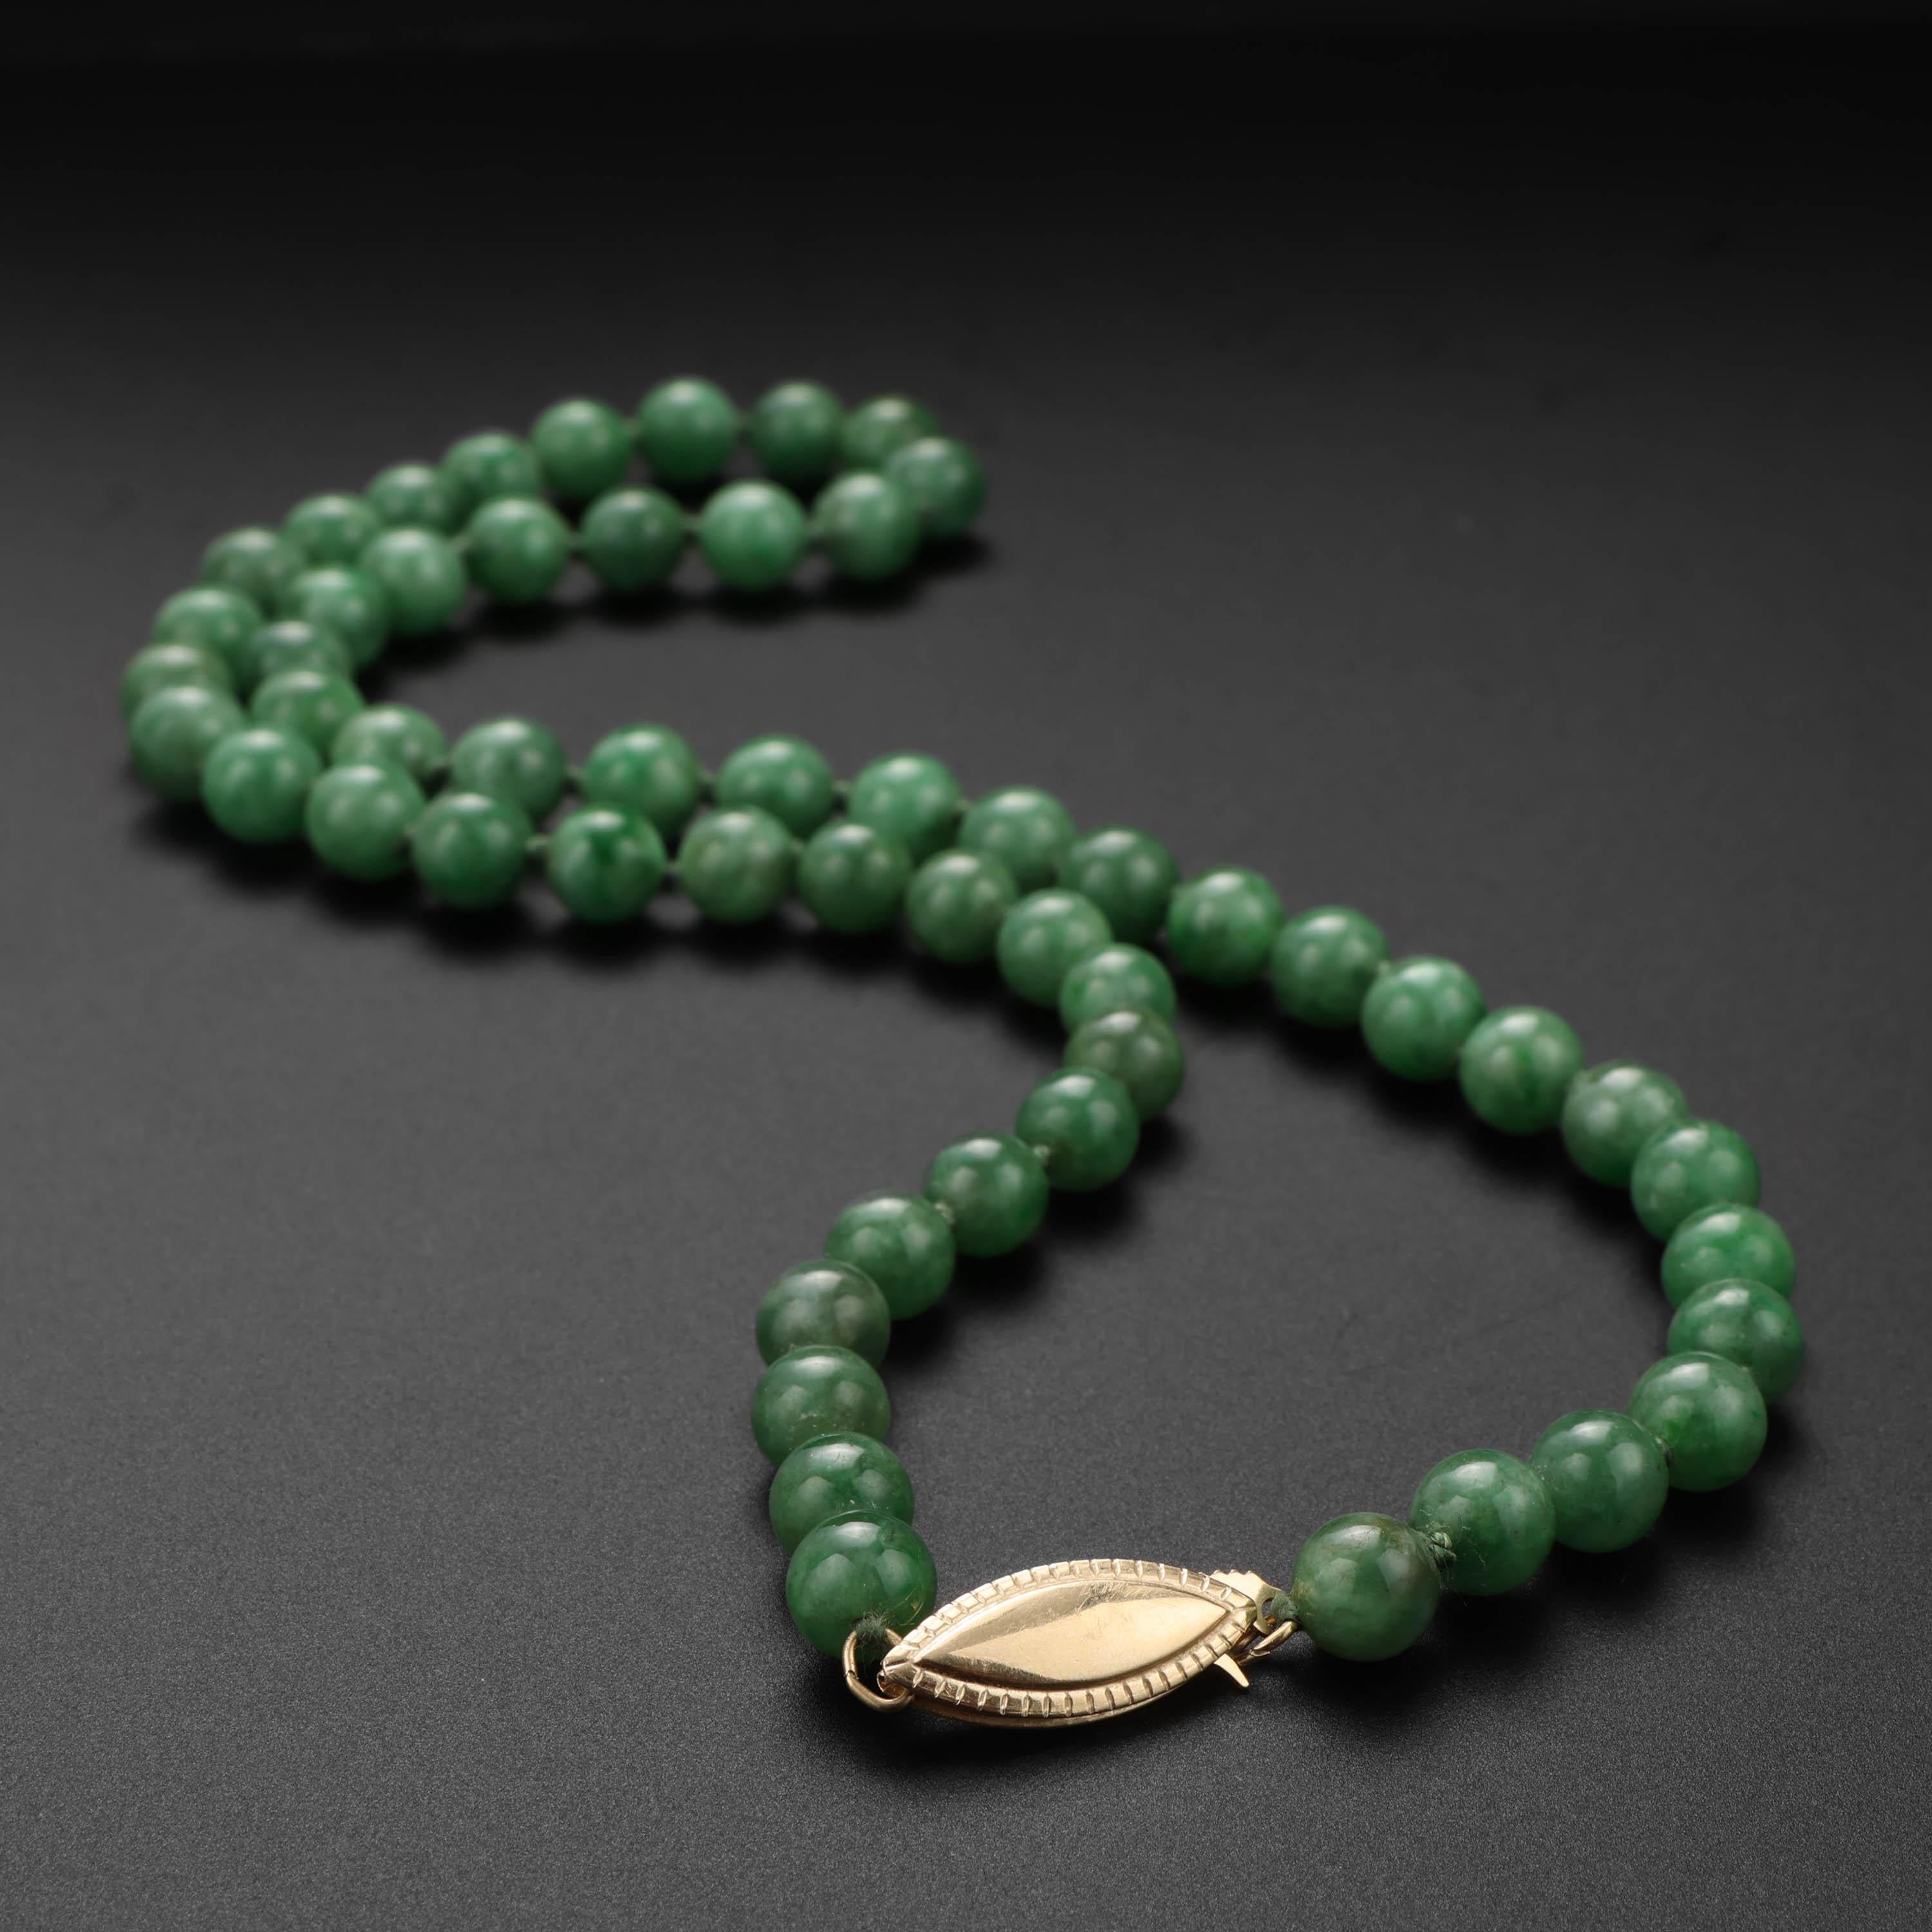 This gorgeous, emerald-green jadeite jade necklace features 56 natural and untreated jadeite jade beads that graduate in size from 6mm to 7.4mm. A 14k yellow gold marquise clasp completes the 16